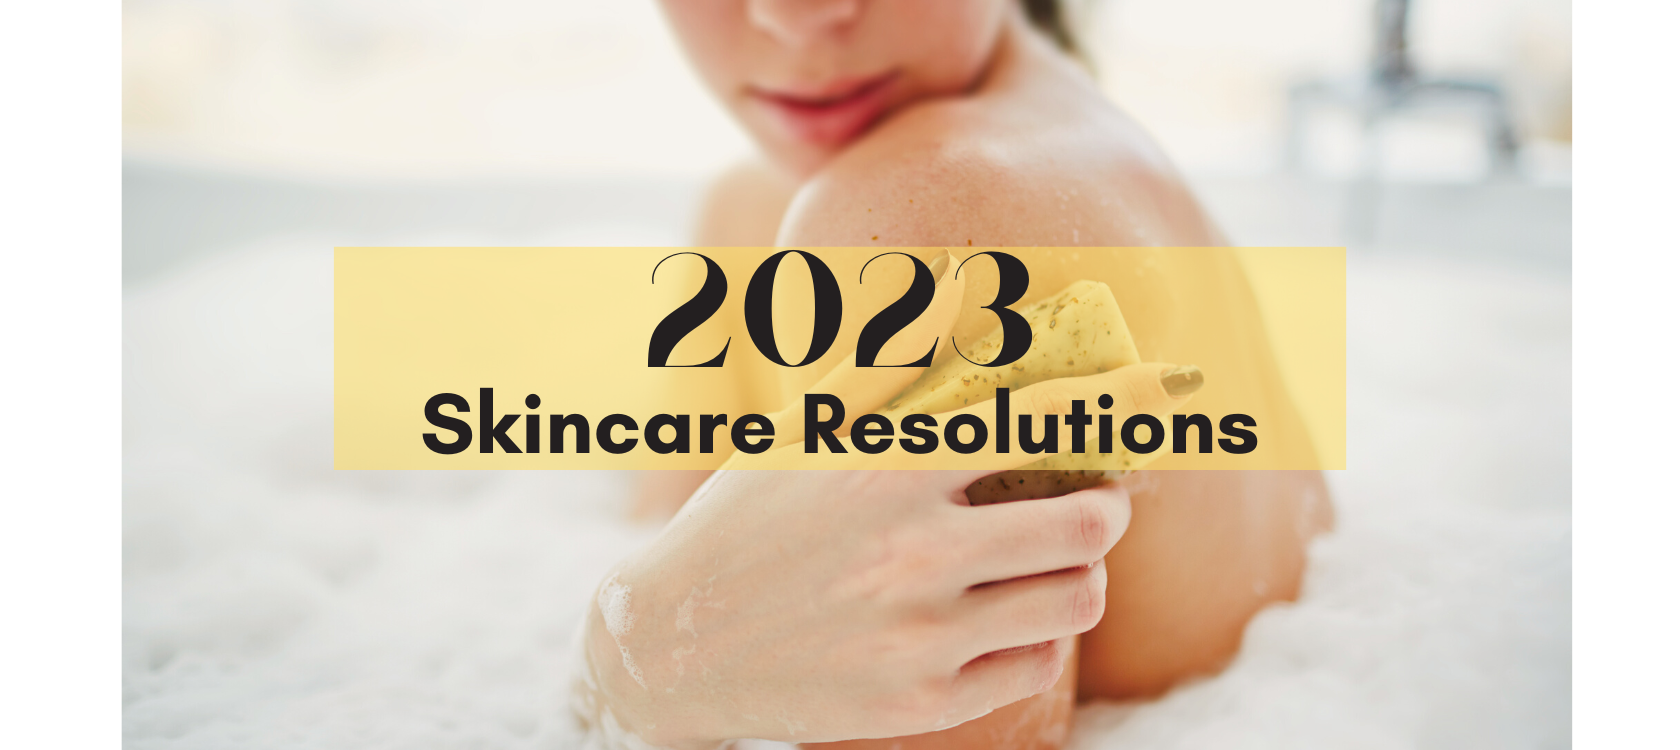 Best New Years SkinCare Resolutions? We got you covered! Take a look at our top resolution ideas that you might want to implement!